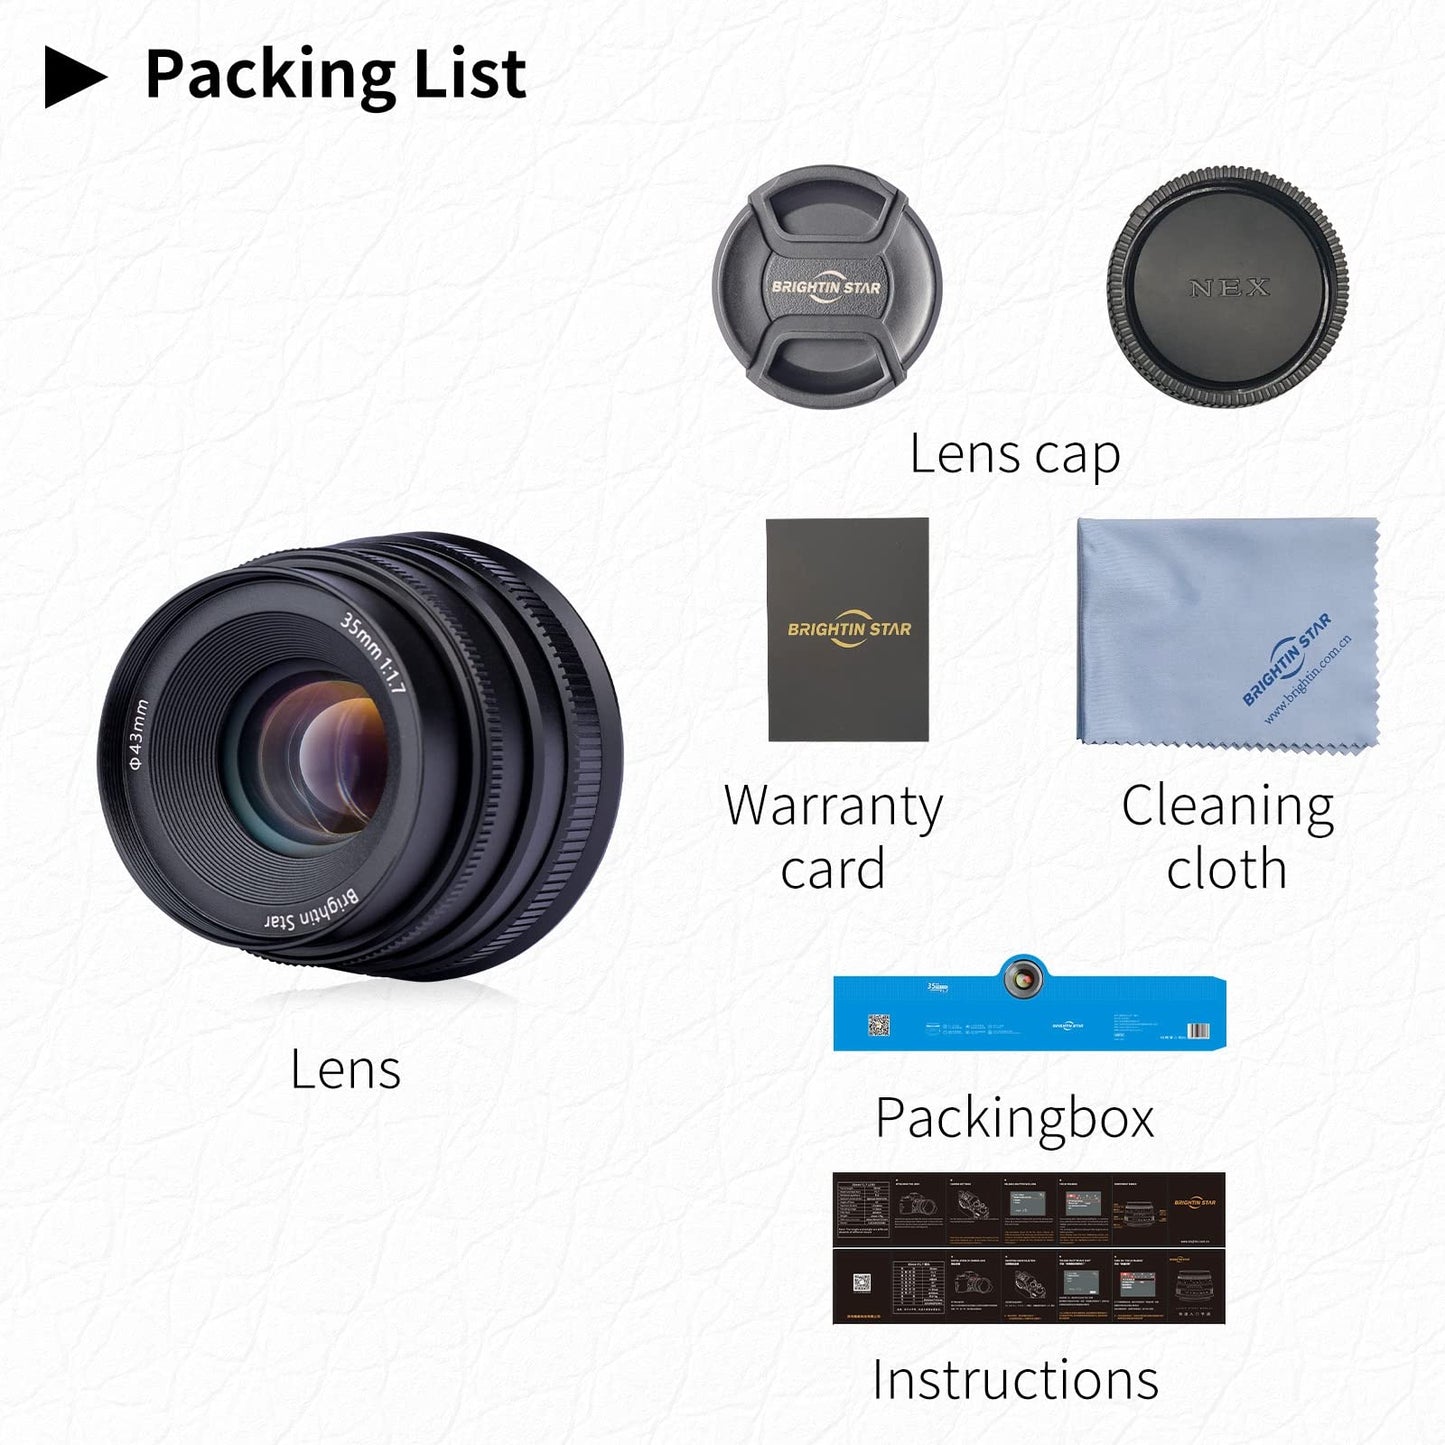 35mm F1.7 Wide-Angle Manual Focus Prime Lens for Panasonic Olympus Micro 4/3 Mirrorless Cameras, MFT APS-C Large Aperture, Fit for LUMIX G7, G7KS, GX85, GX9, G95, GH5, GH6, G100, G9